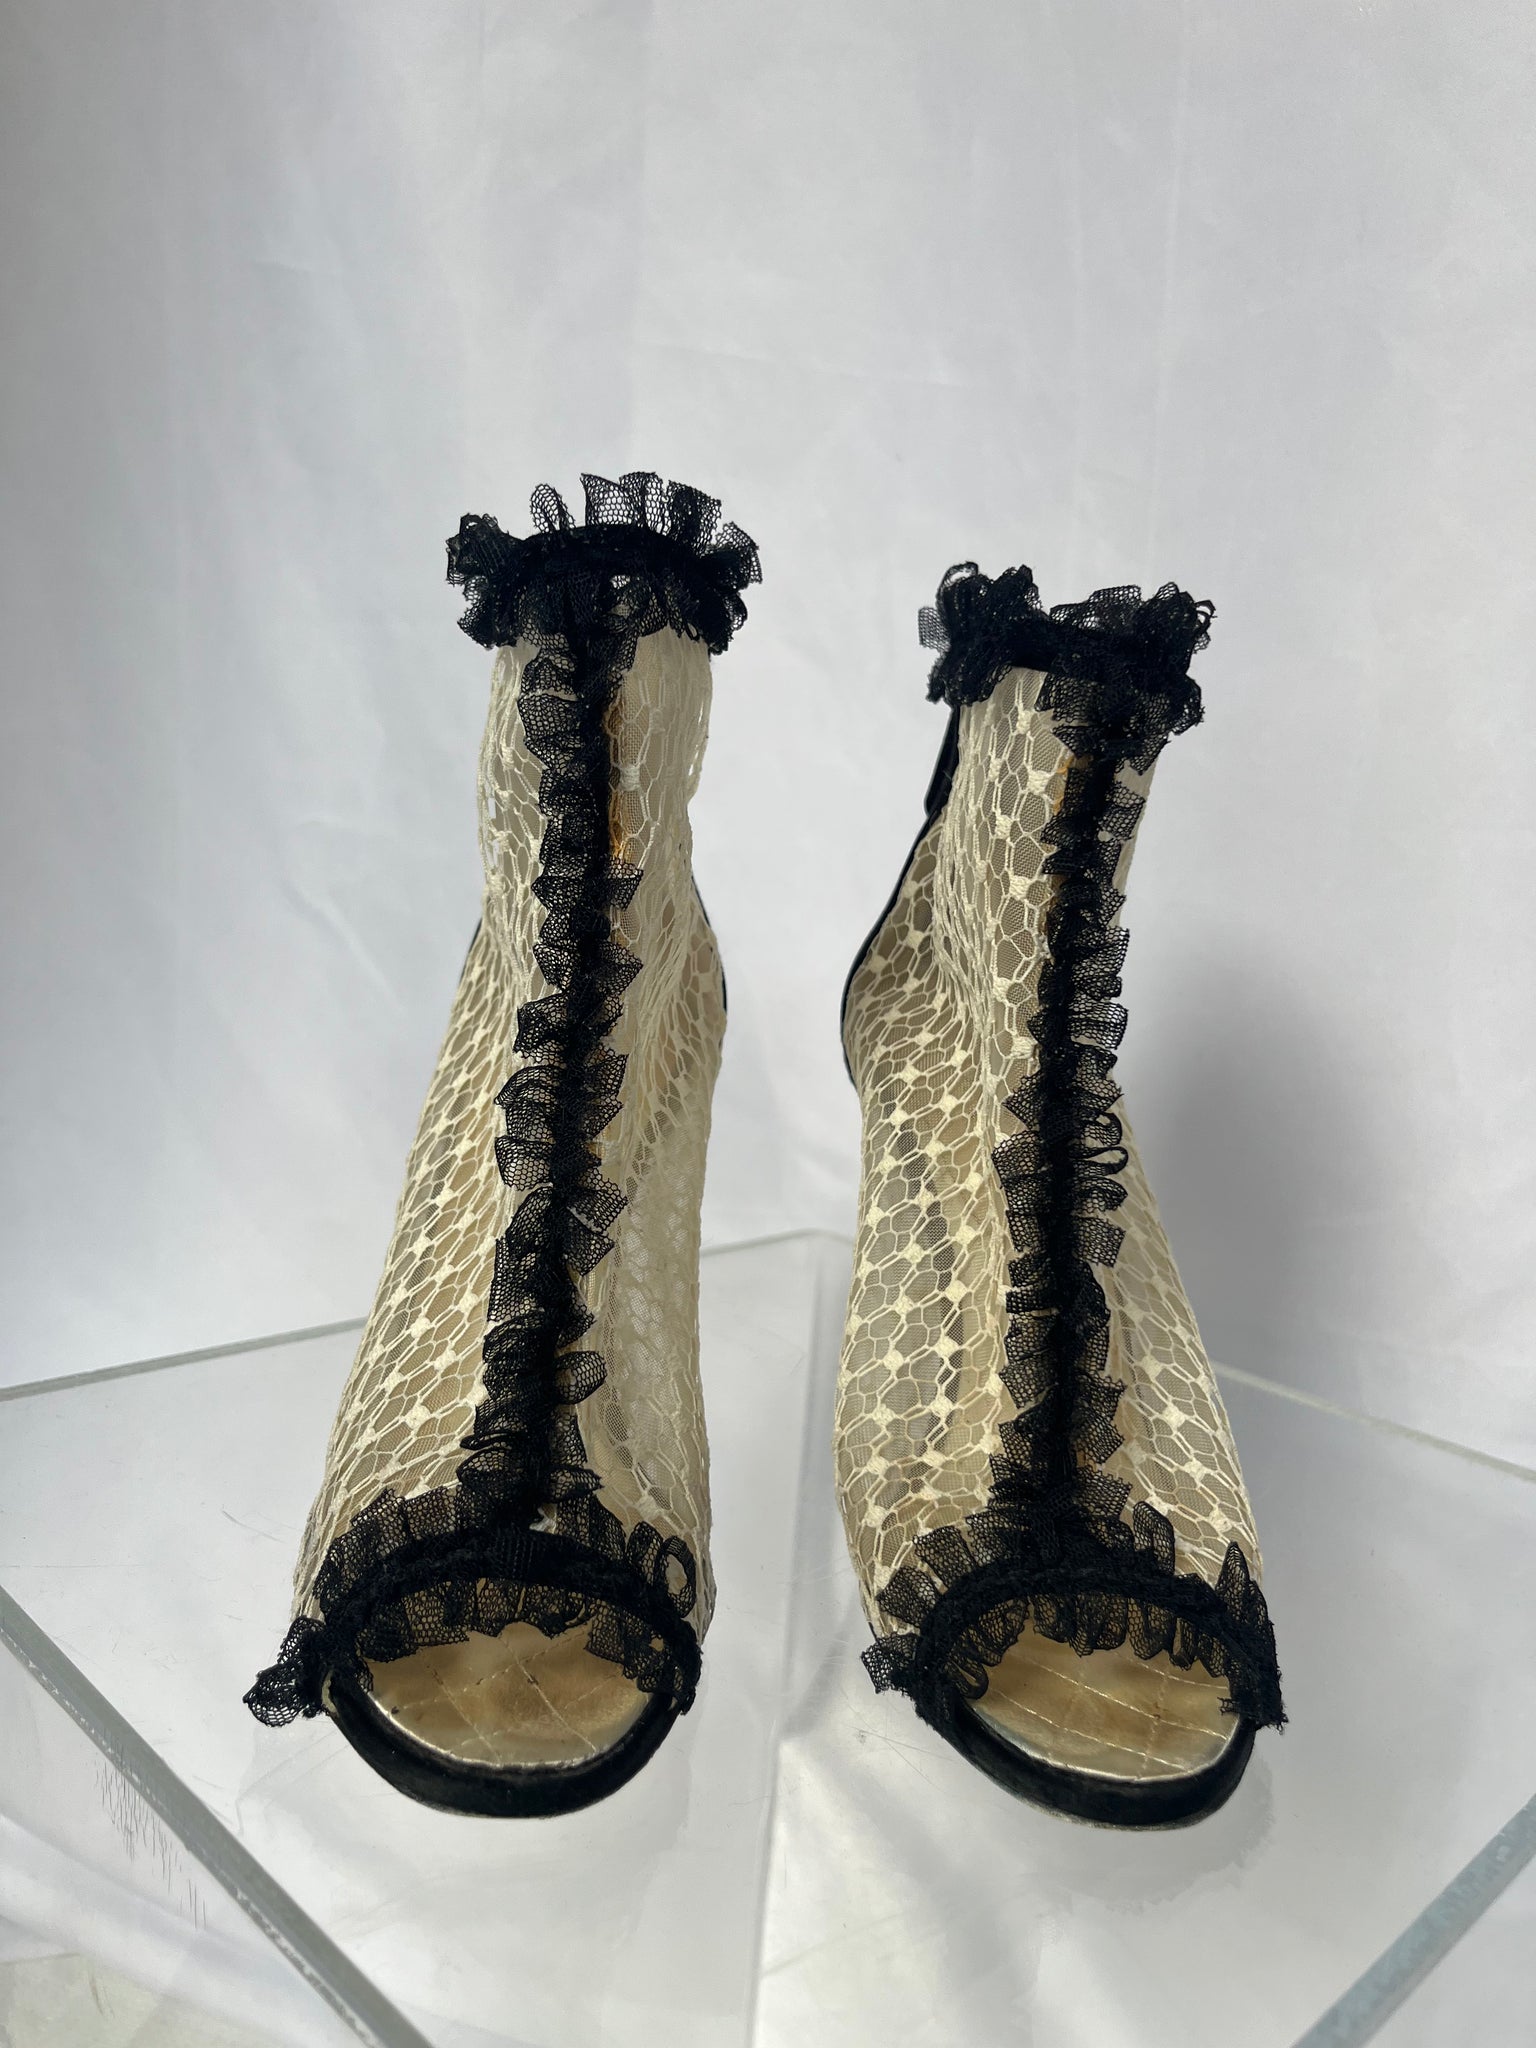 Chanel lace boot